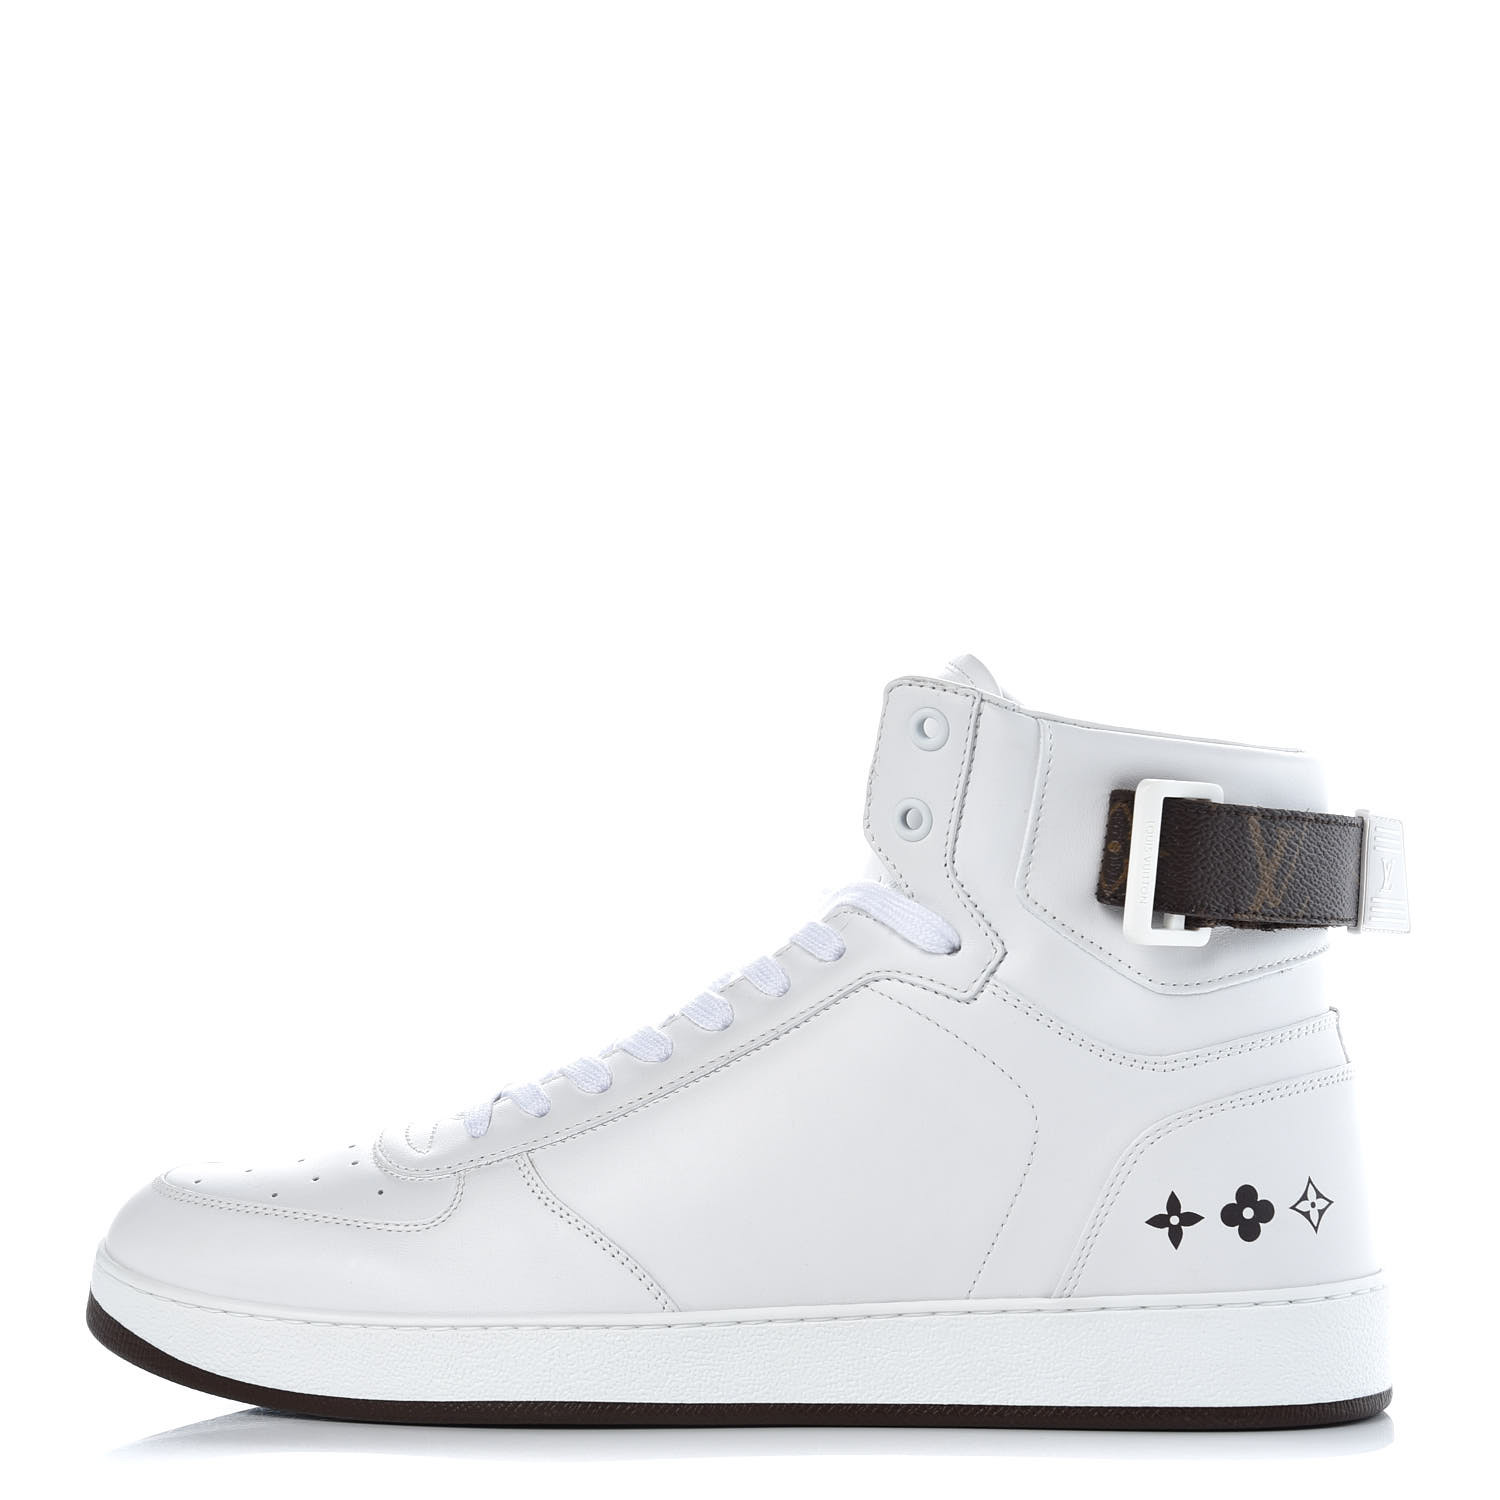 mens high top white sneakers